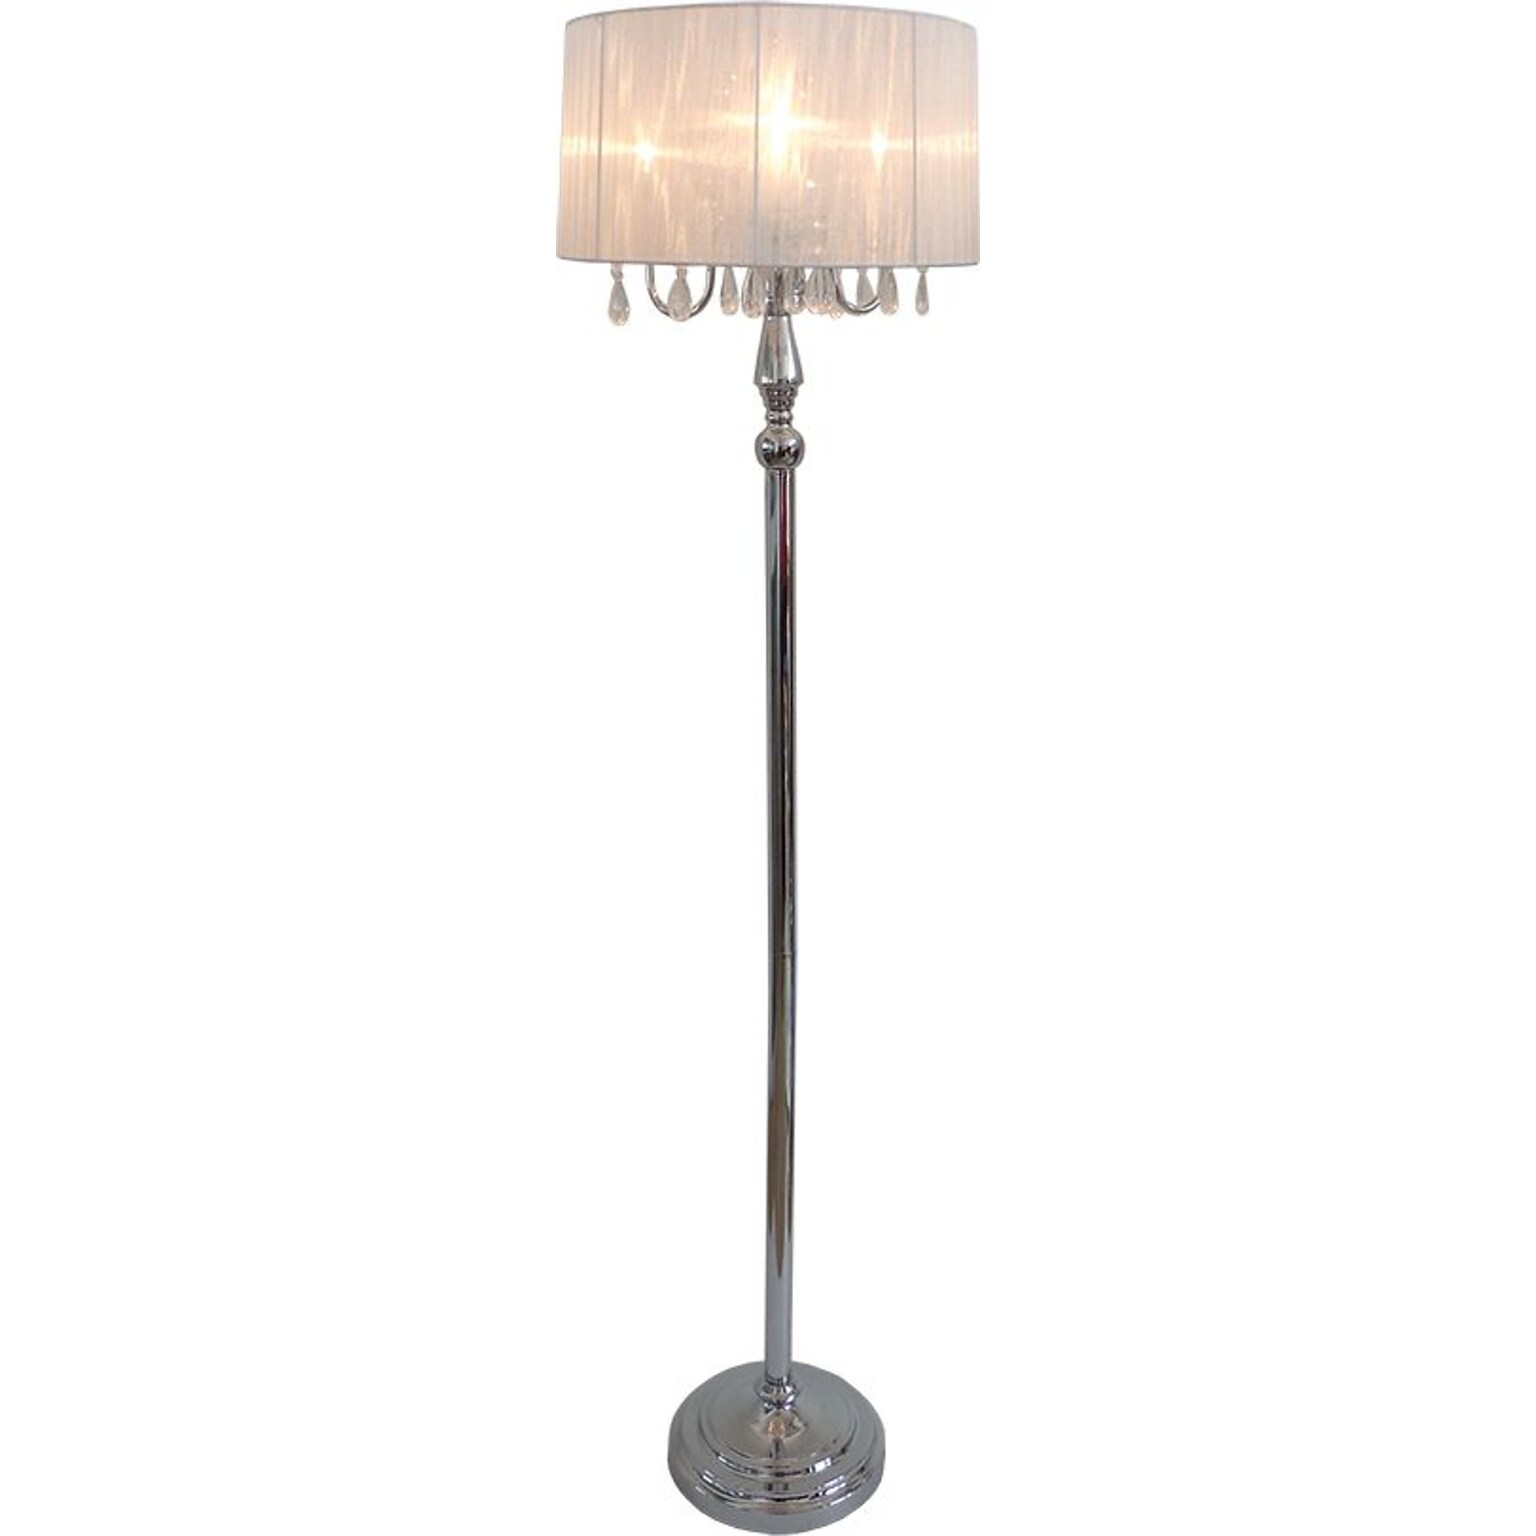 Elegant Designs Sheer White Shade Floor Incandescent Lamp With Hanging Crystals, Chrome